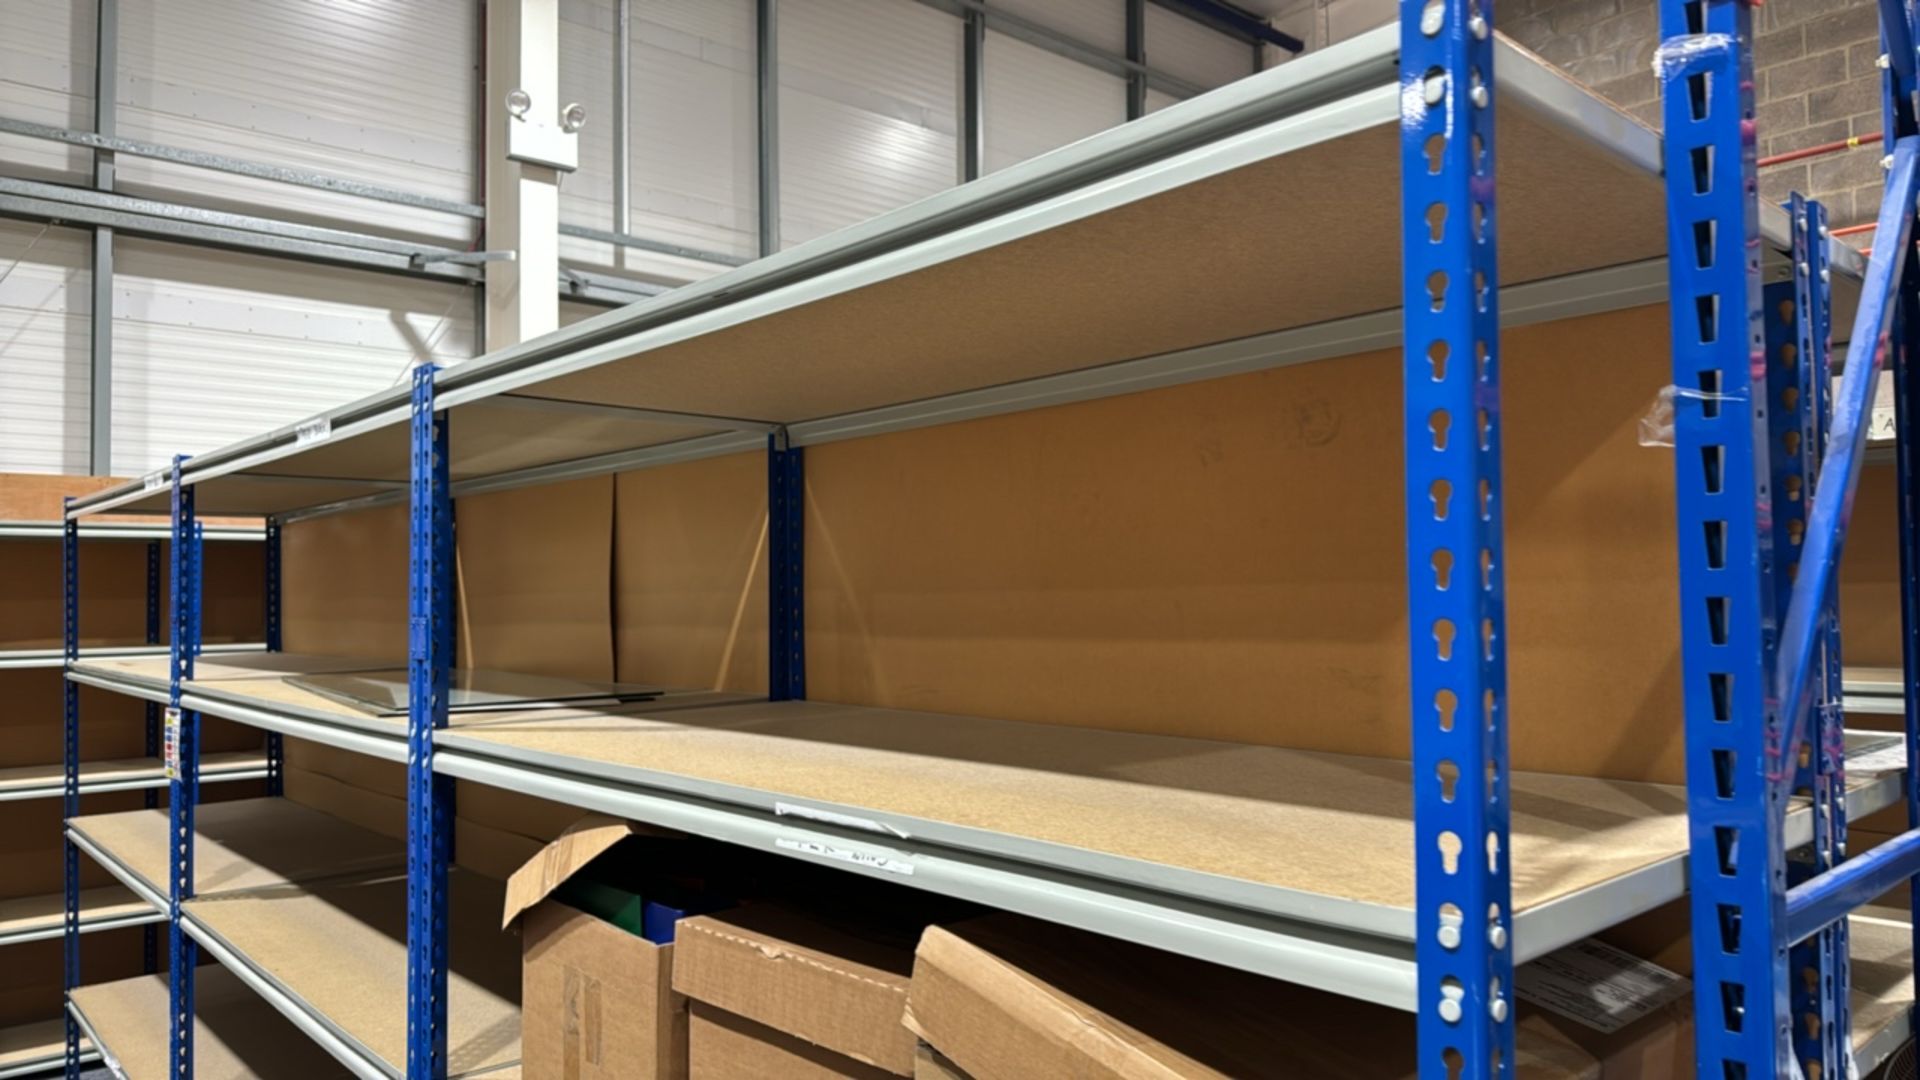 6 bays Of Back To Back Boltless Racking - Image 4 of 4